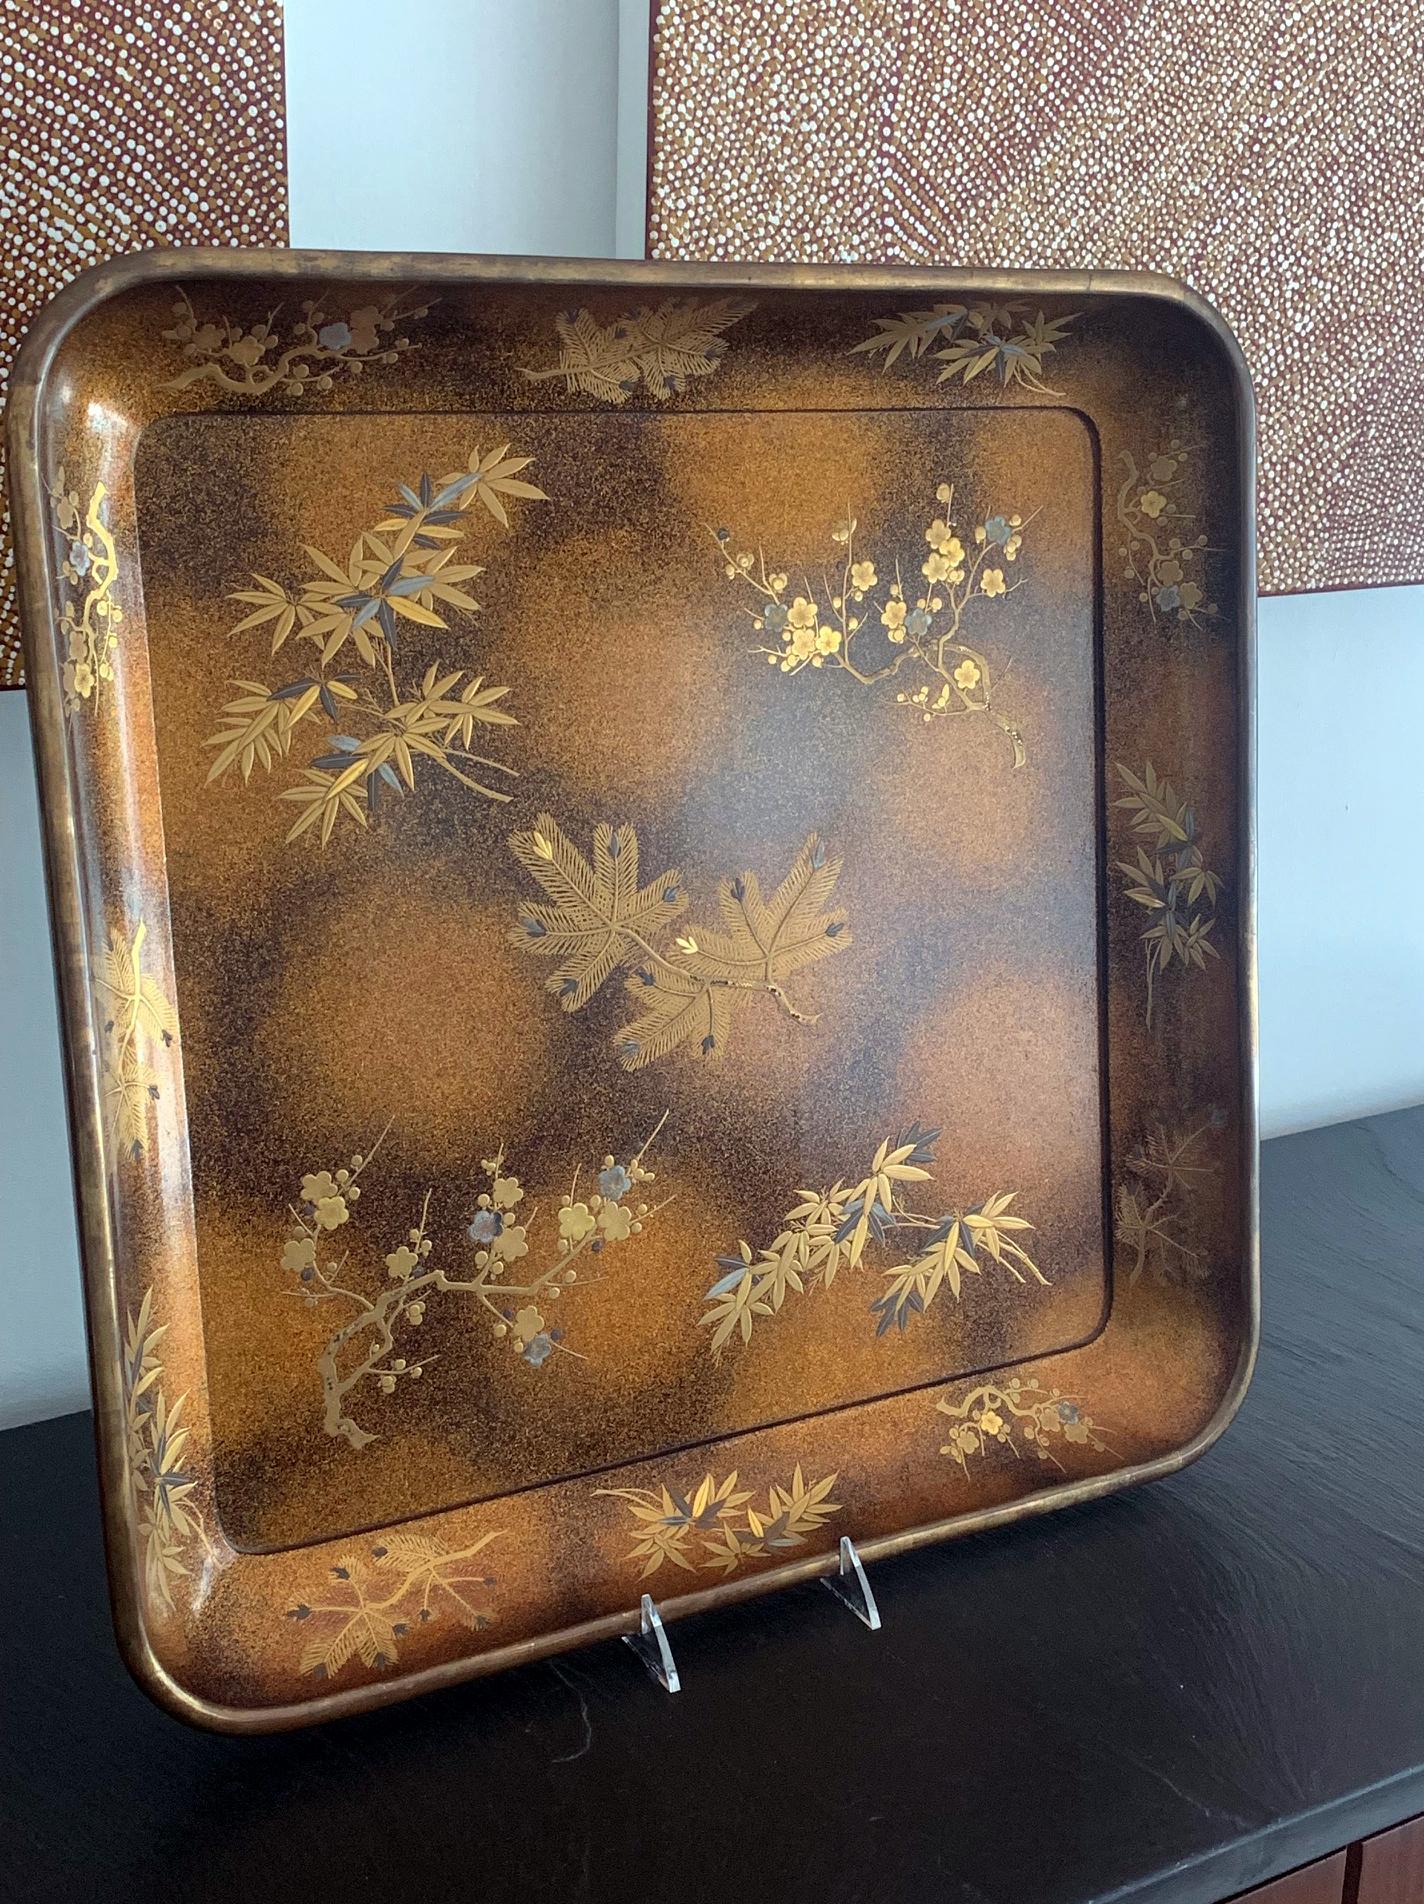 A large square lacquer presentation tray (likely for kimono) predated 1950 of the Showa period. Elaborately decorated with Maki-e that depicts the prunus blossom, bamboo and needle pine branches on a fantastic mottled Mura-Nashiji background. The